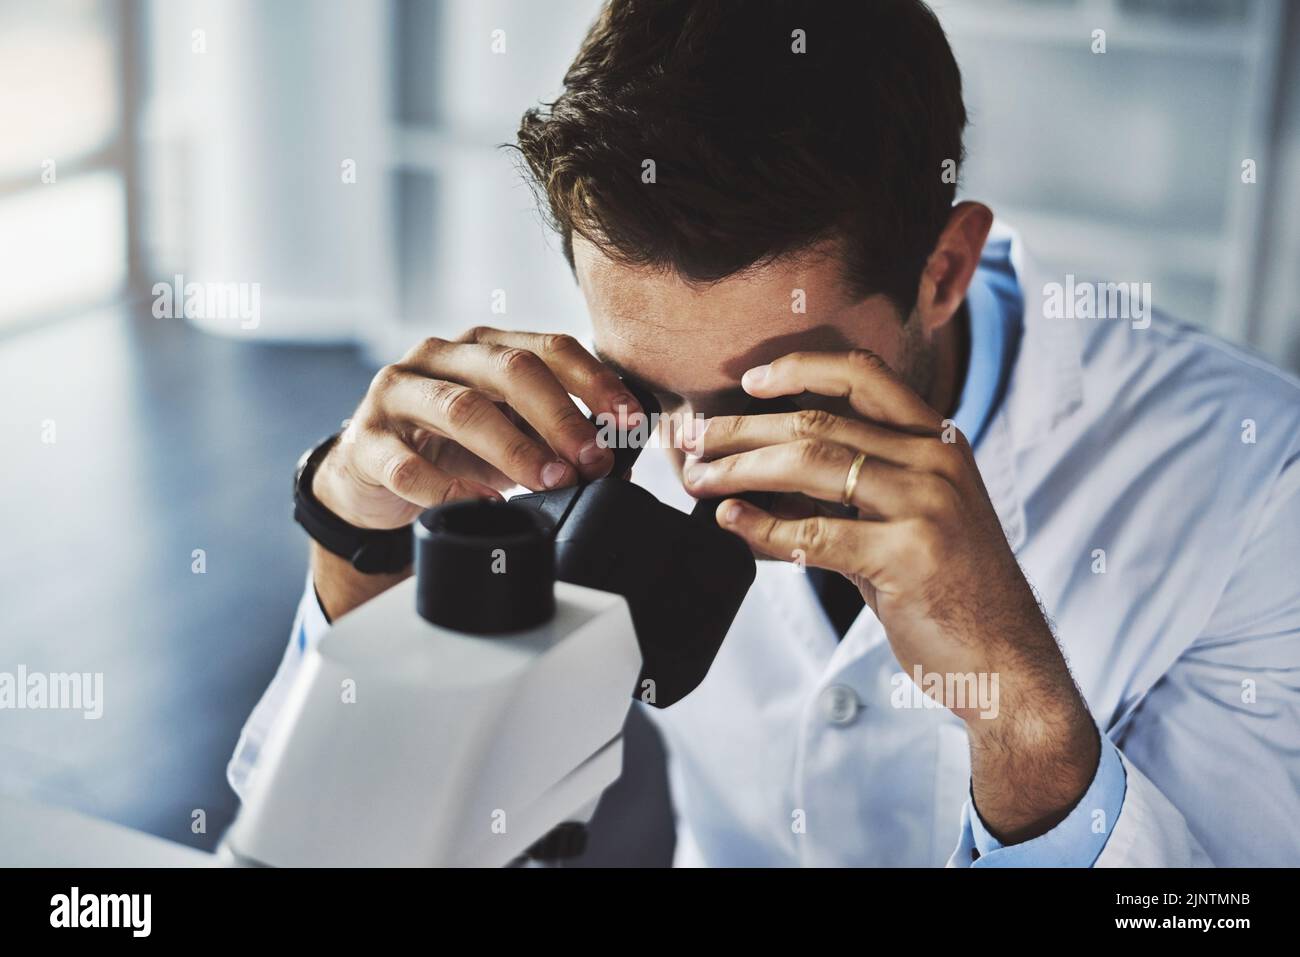 You have to look closely to see the bigger picture. a scientist using a microscope in a lab. Stock Photo